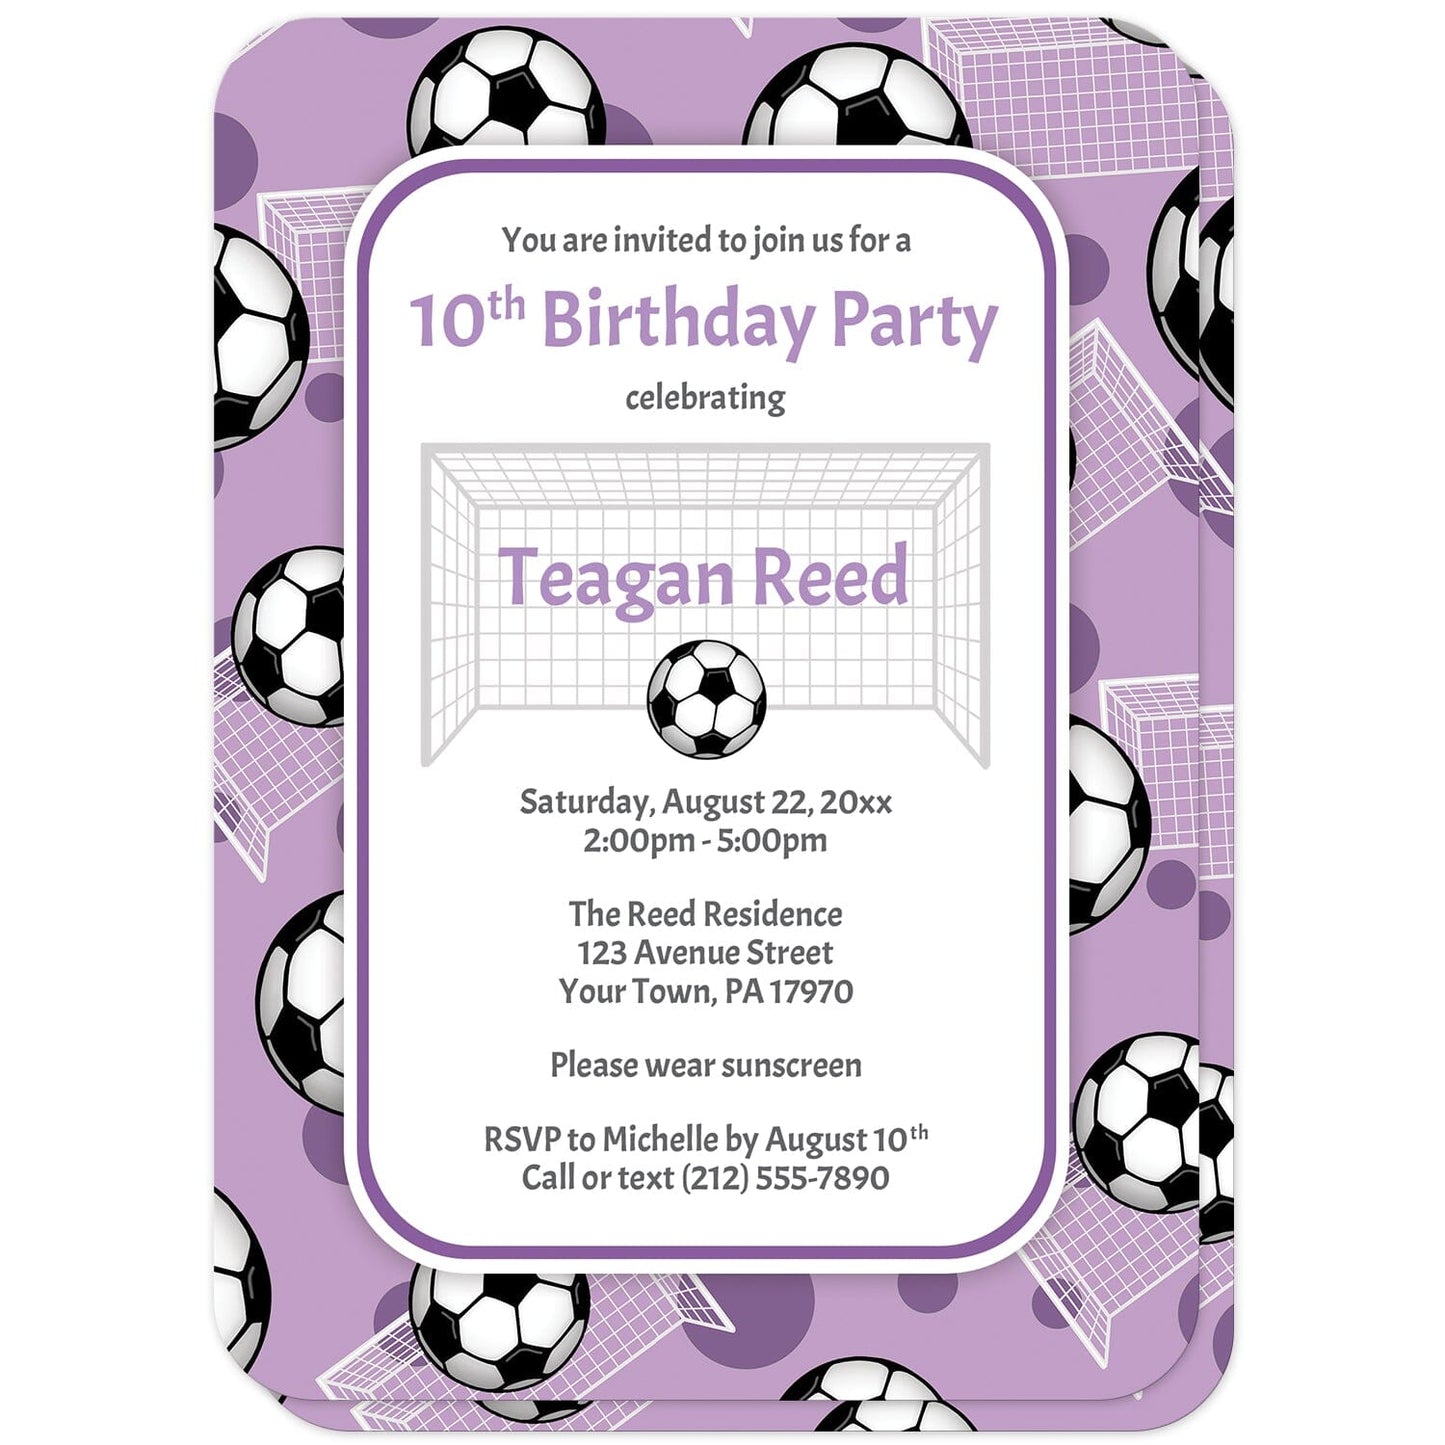 Soccer Ball and Goal Purple Birthday Party Invitations (with rounded corners) at Artistically Invited. Sports-themed soccer ball and goal purple birthday party invitations for any age or milestone that are uniquely illustrated with a pattern of soccer balls and soccer goals over a purple background color. Your personalized birthday party details are custom printed in purple and gray over white in the center over the soccer pattern.